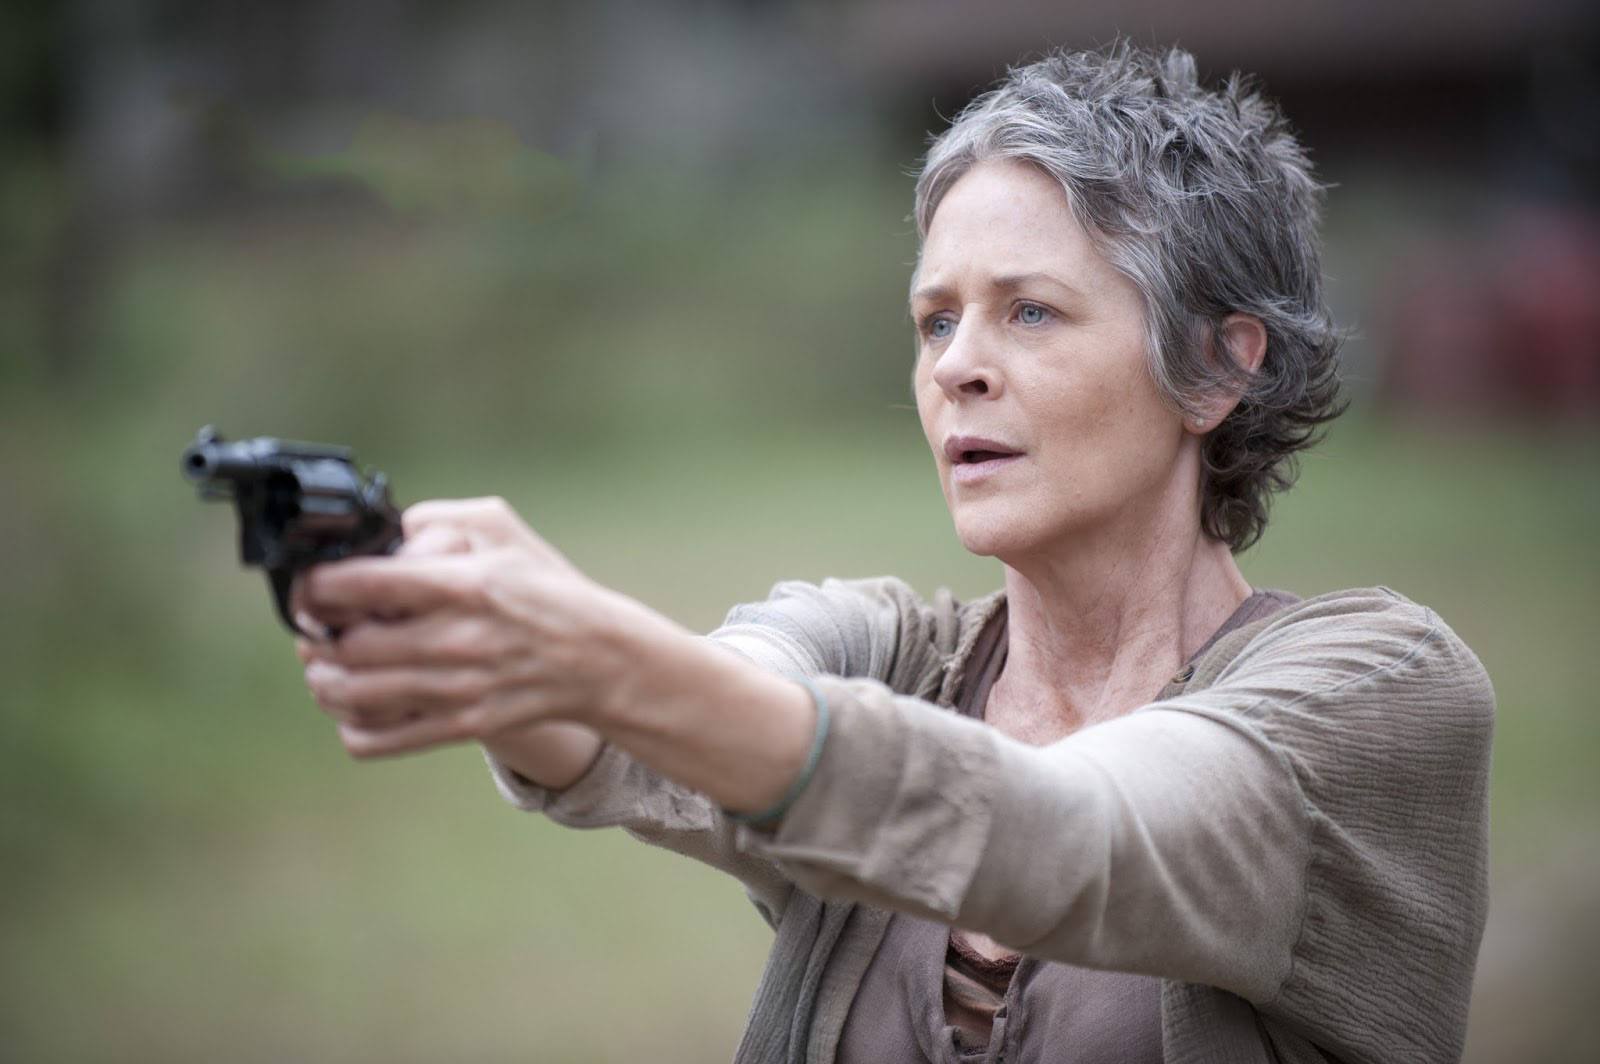 Carol holding a gun in a scene from 'The Walking Dead' episode 'The Grove'